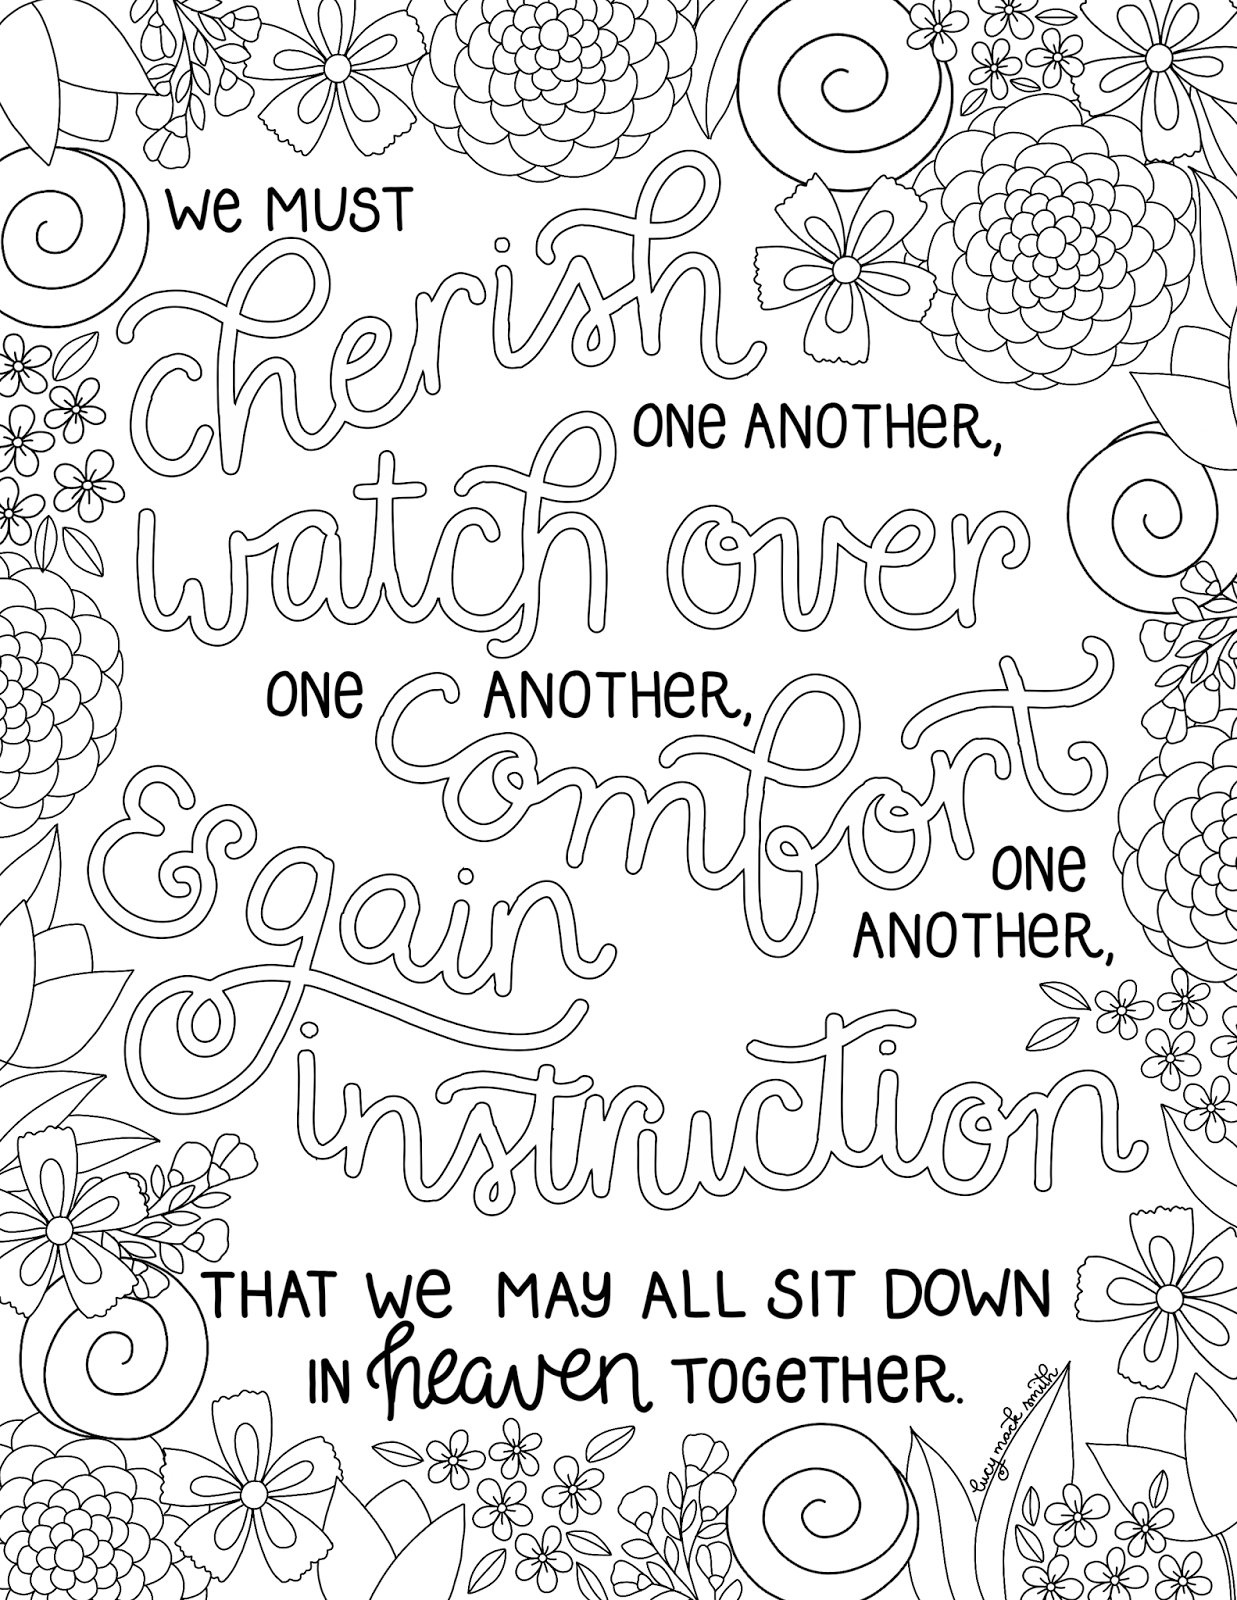 Hello friends this weeks coloring page was a special request for a page about relief societyâ coloring pages inspirational lds coloring pages coloring pages